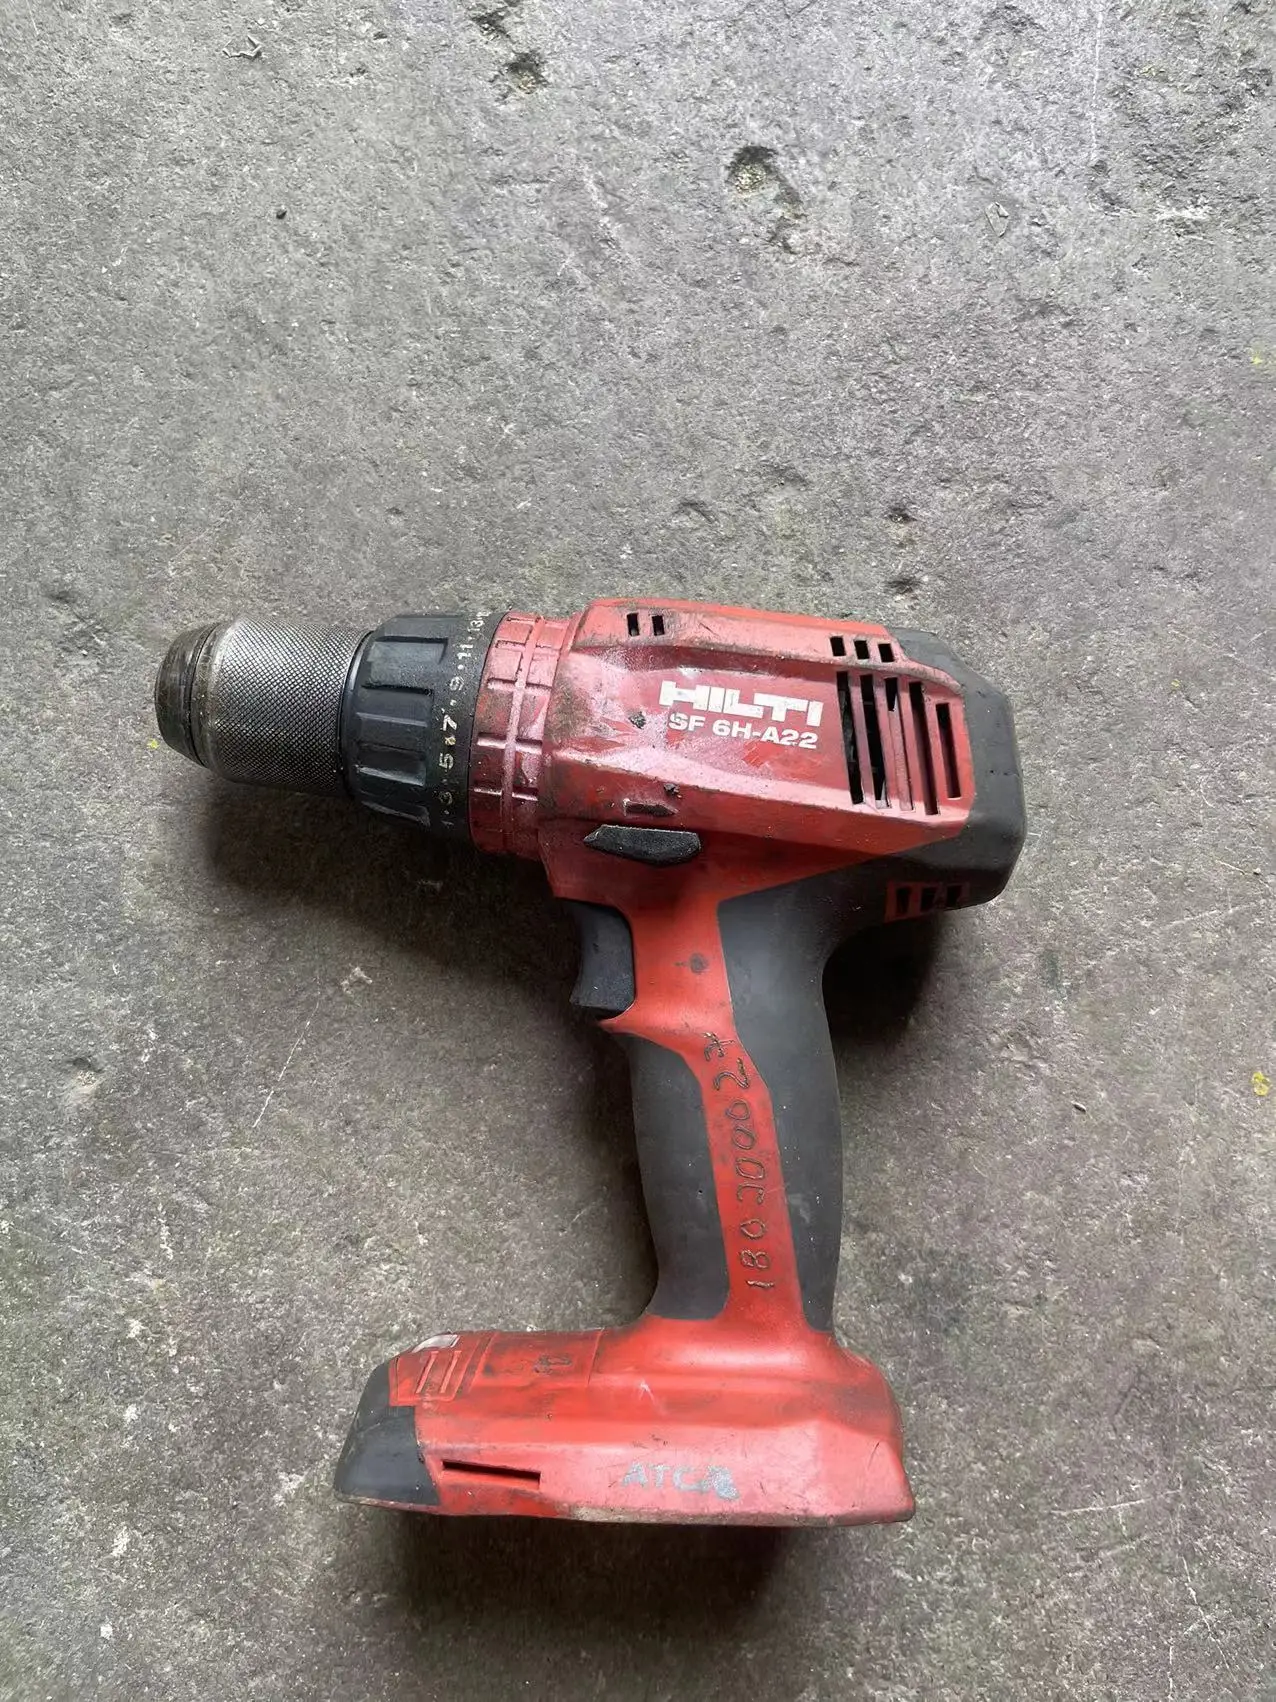 

Hilti SF 6H -A22 cordless Hammer-drill driver Body Only,SECOND HAND